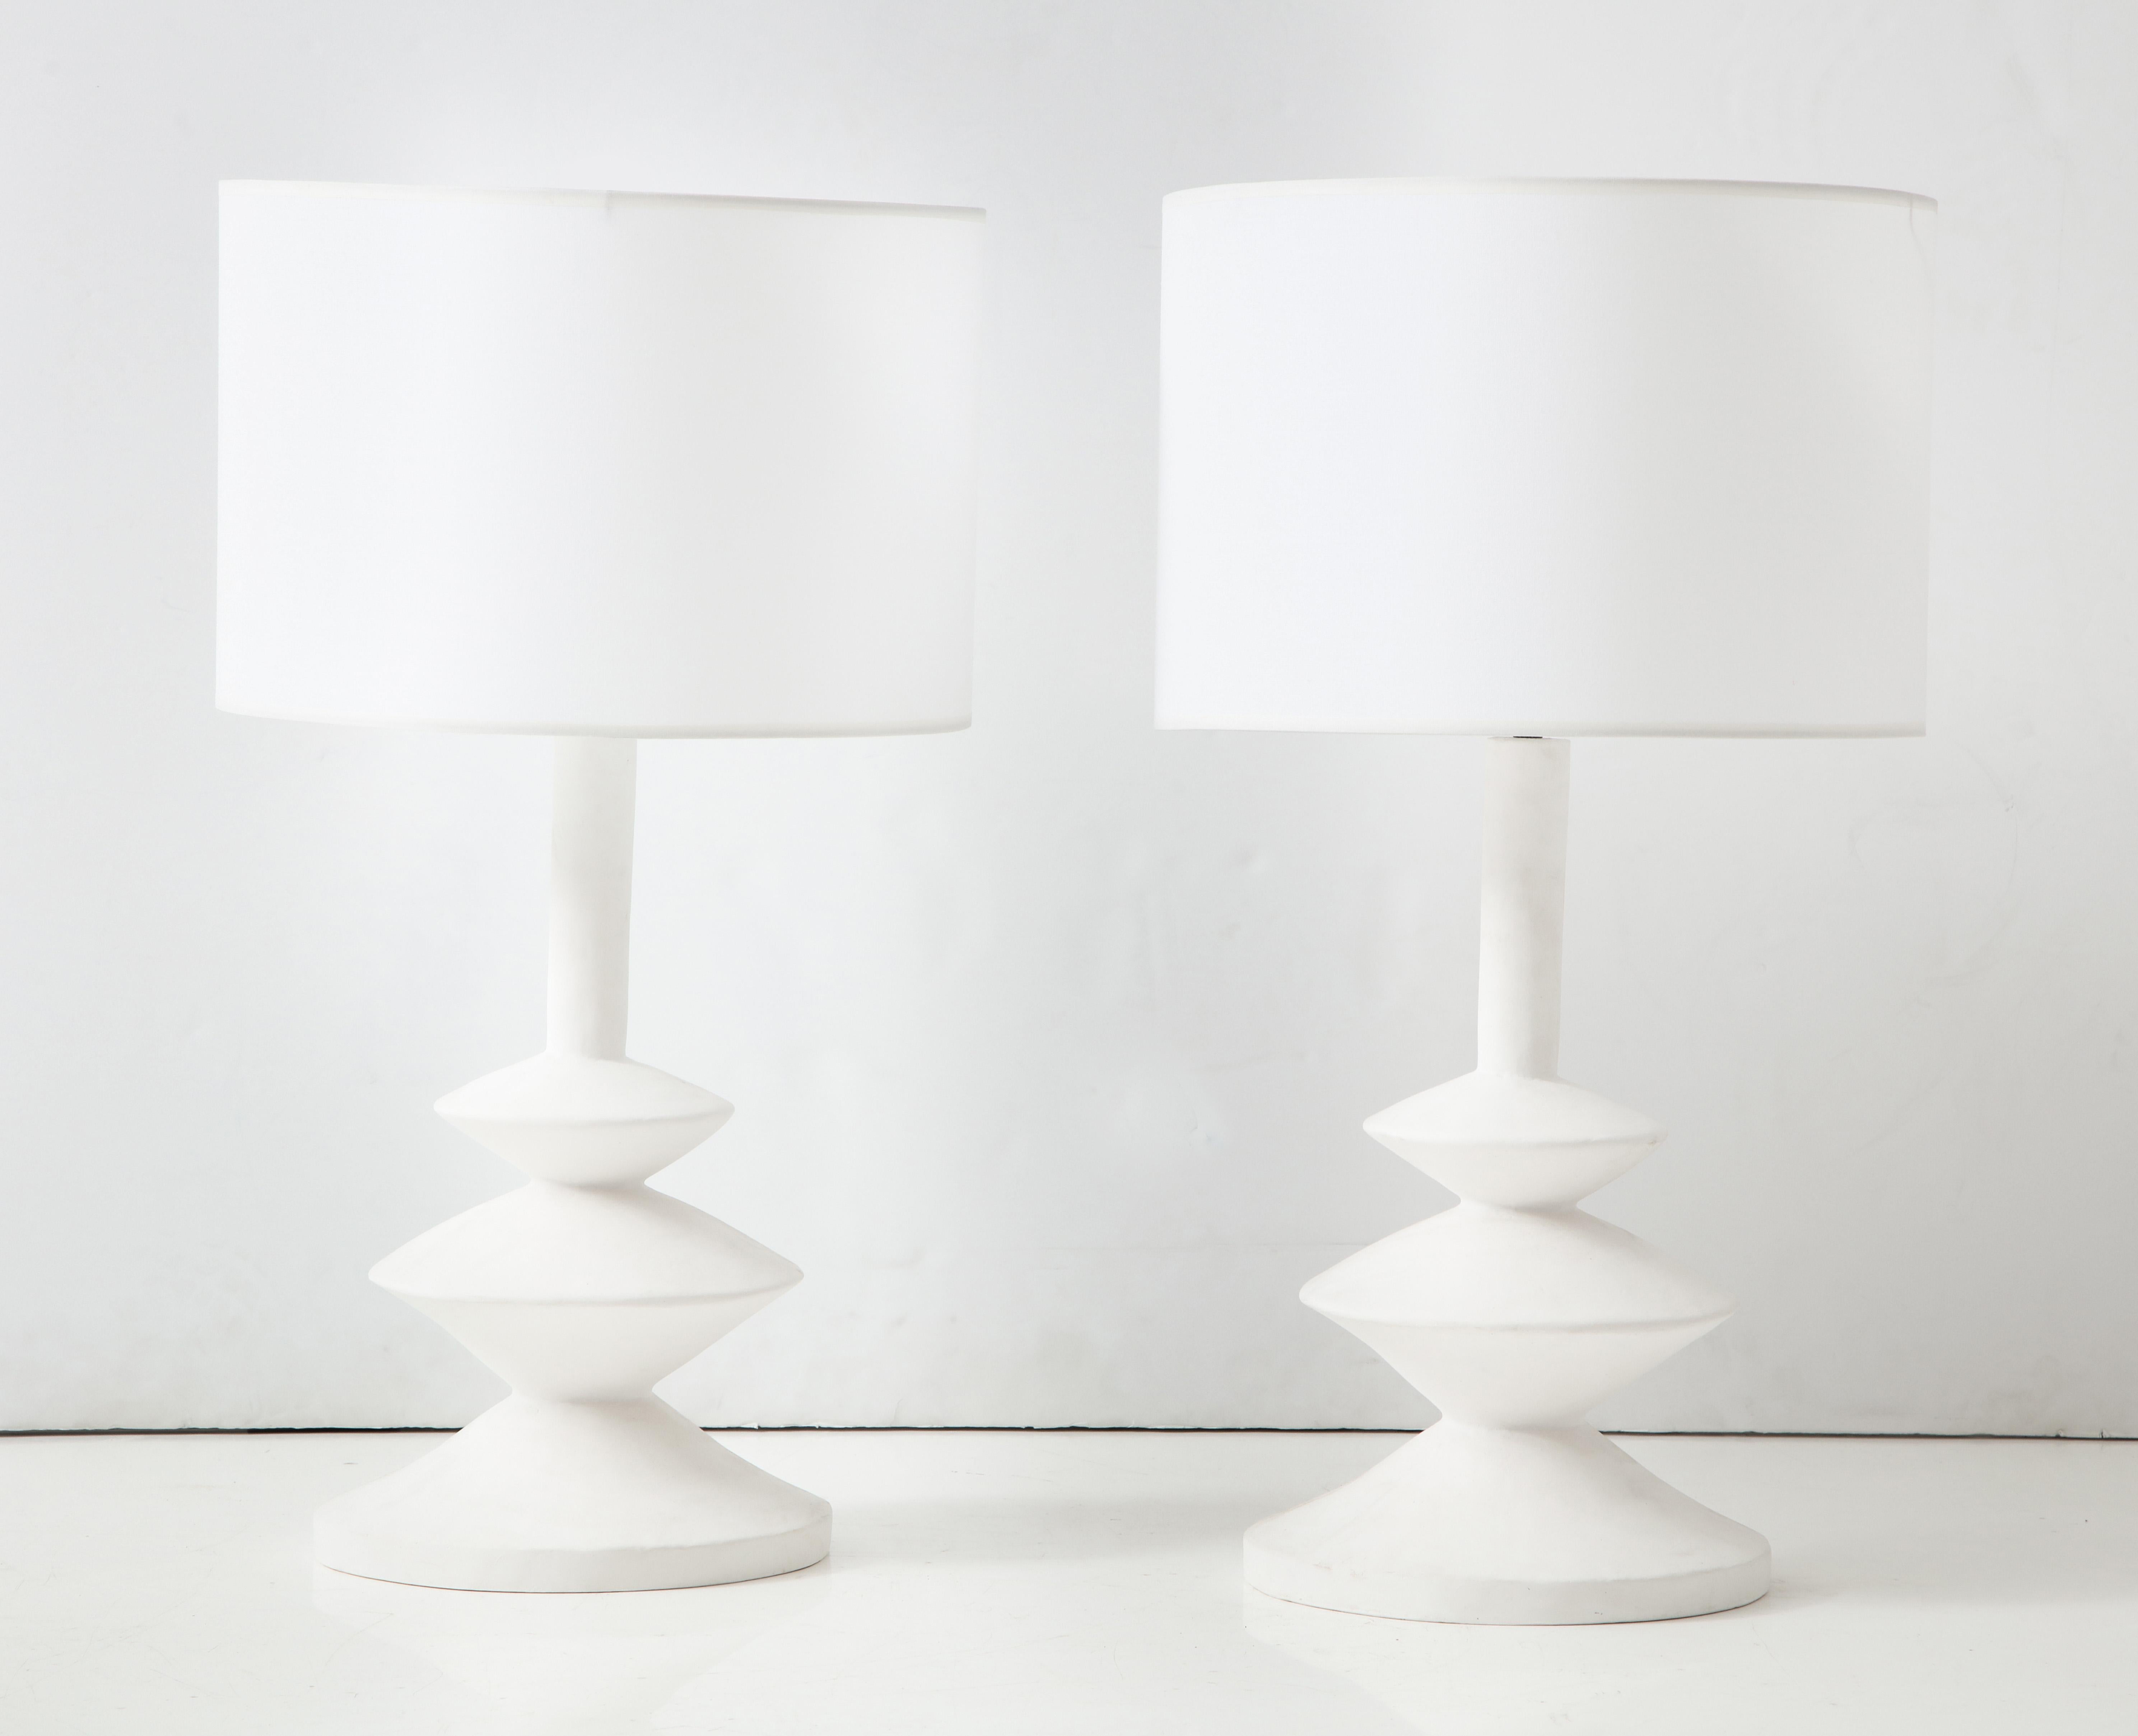 Custom pair of French plaster lamps in the manner of Alberto Giacometti.
The lamp shades are not included. One pair is currently available.
Lead Time for custom made is 8-10 weeks.